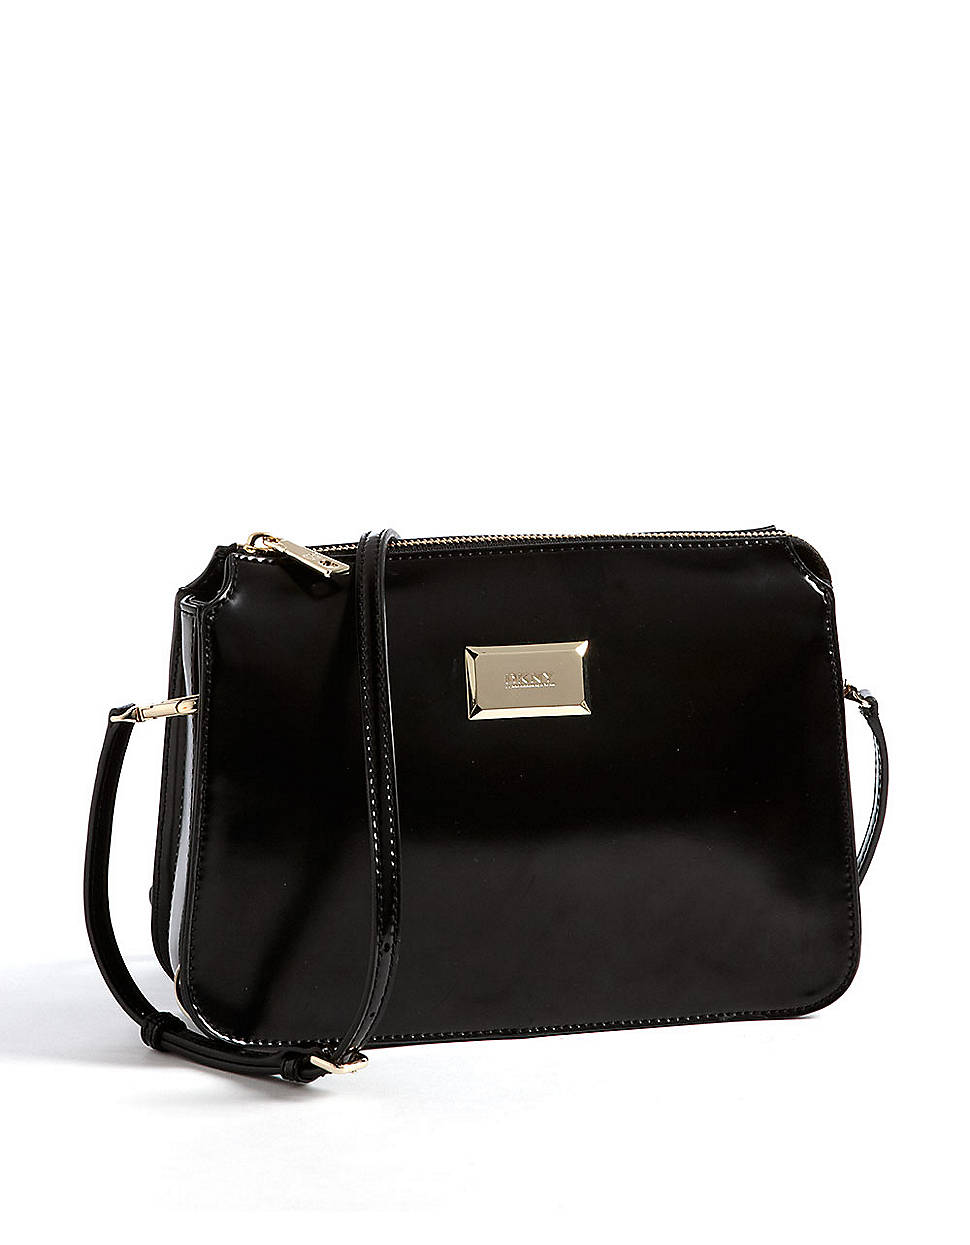 Dkny Patent Leather Crossbody Bag in Black | Lyst